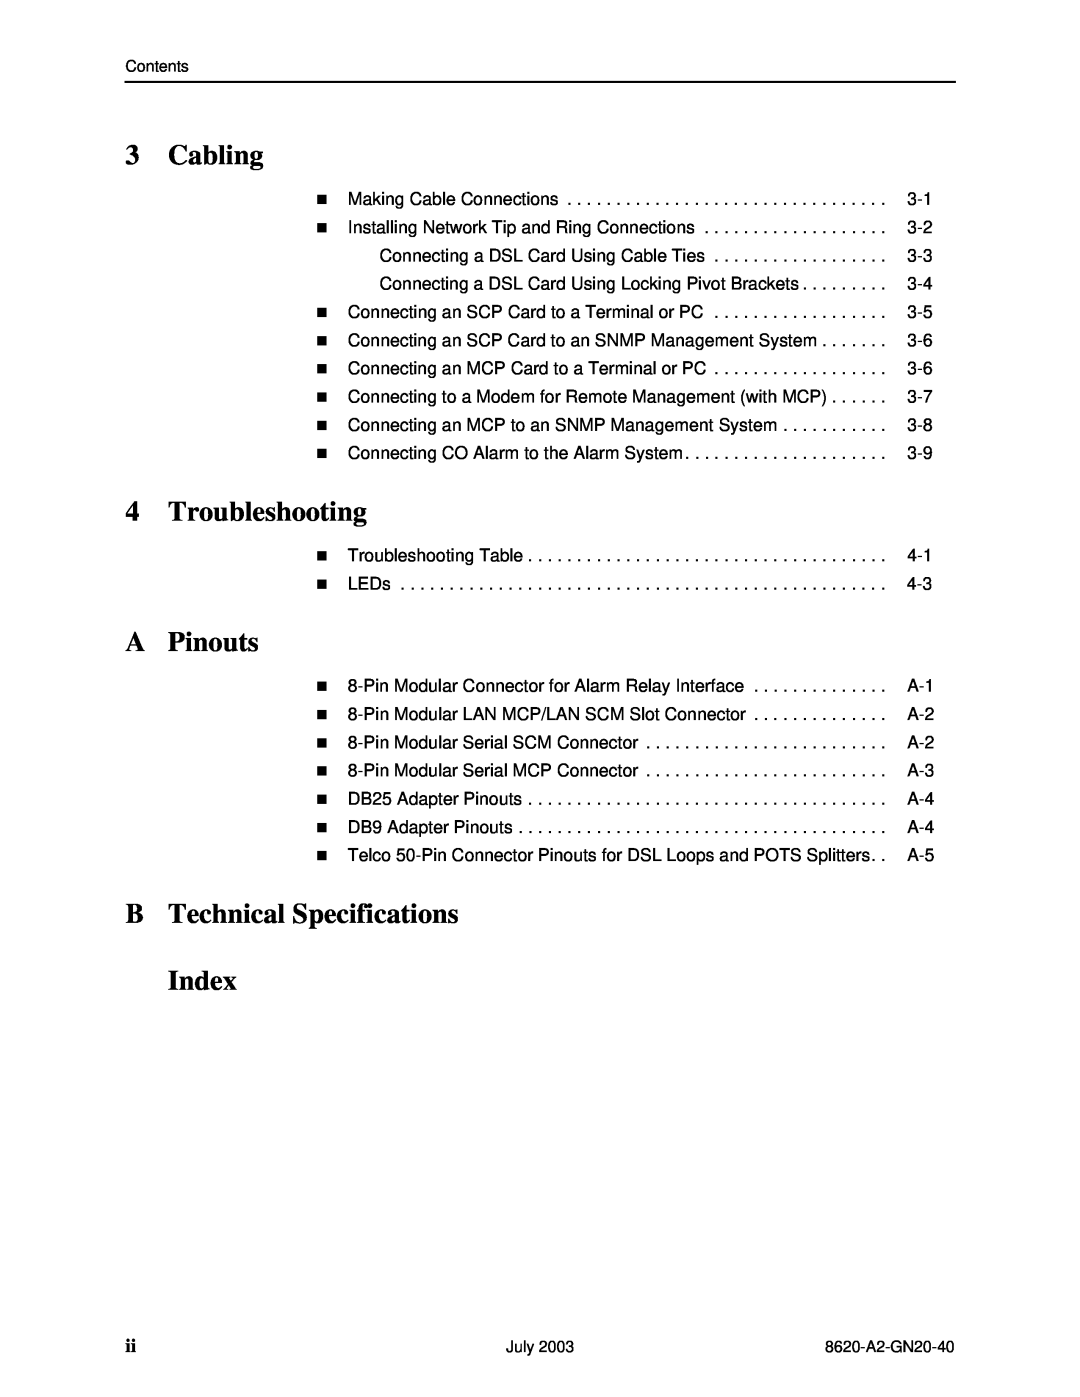 Paradyne 8620 manual Cabling, Troubleshooting, A Pinouts, B Technical Specifications Index 